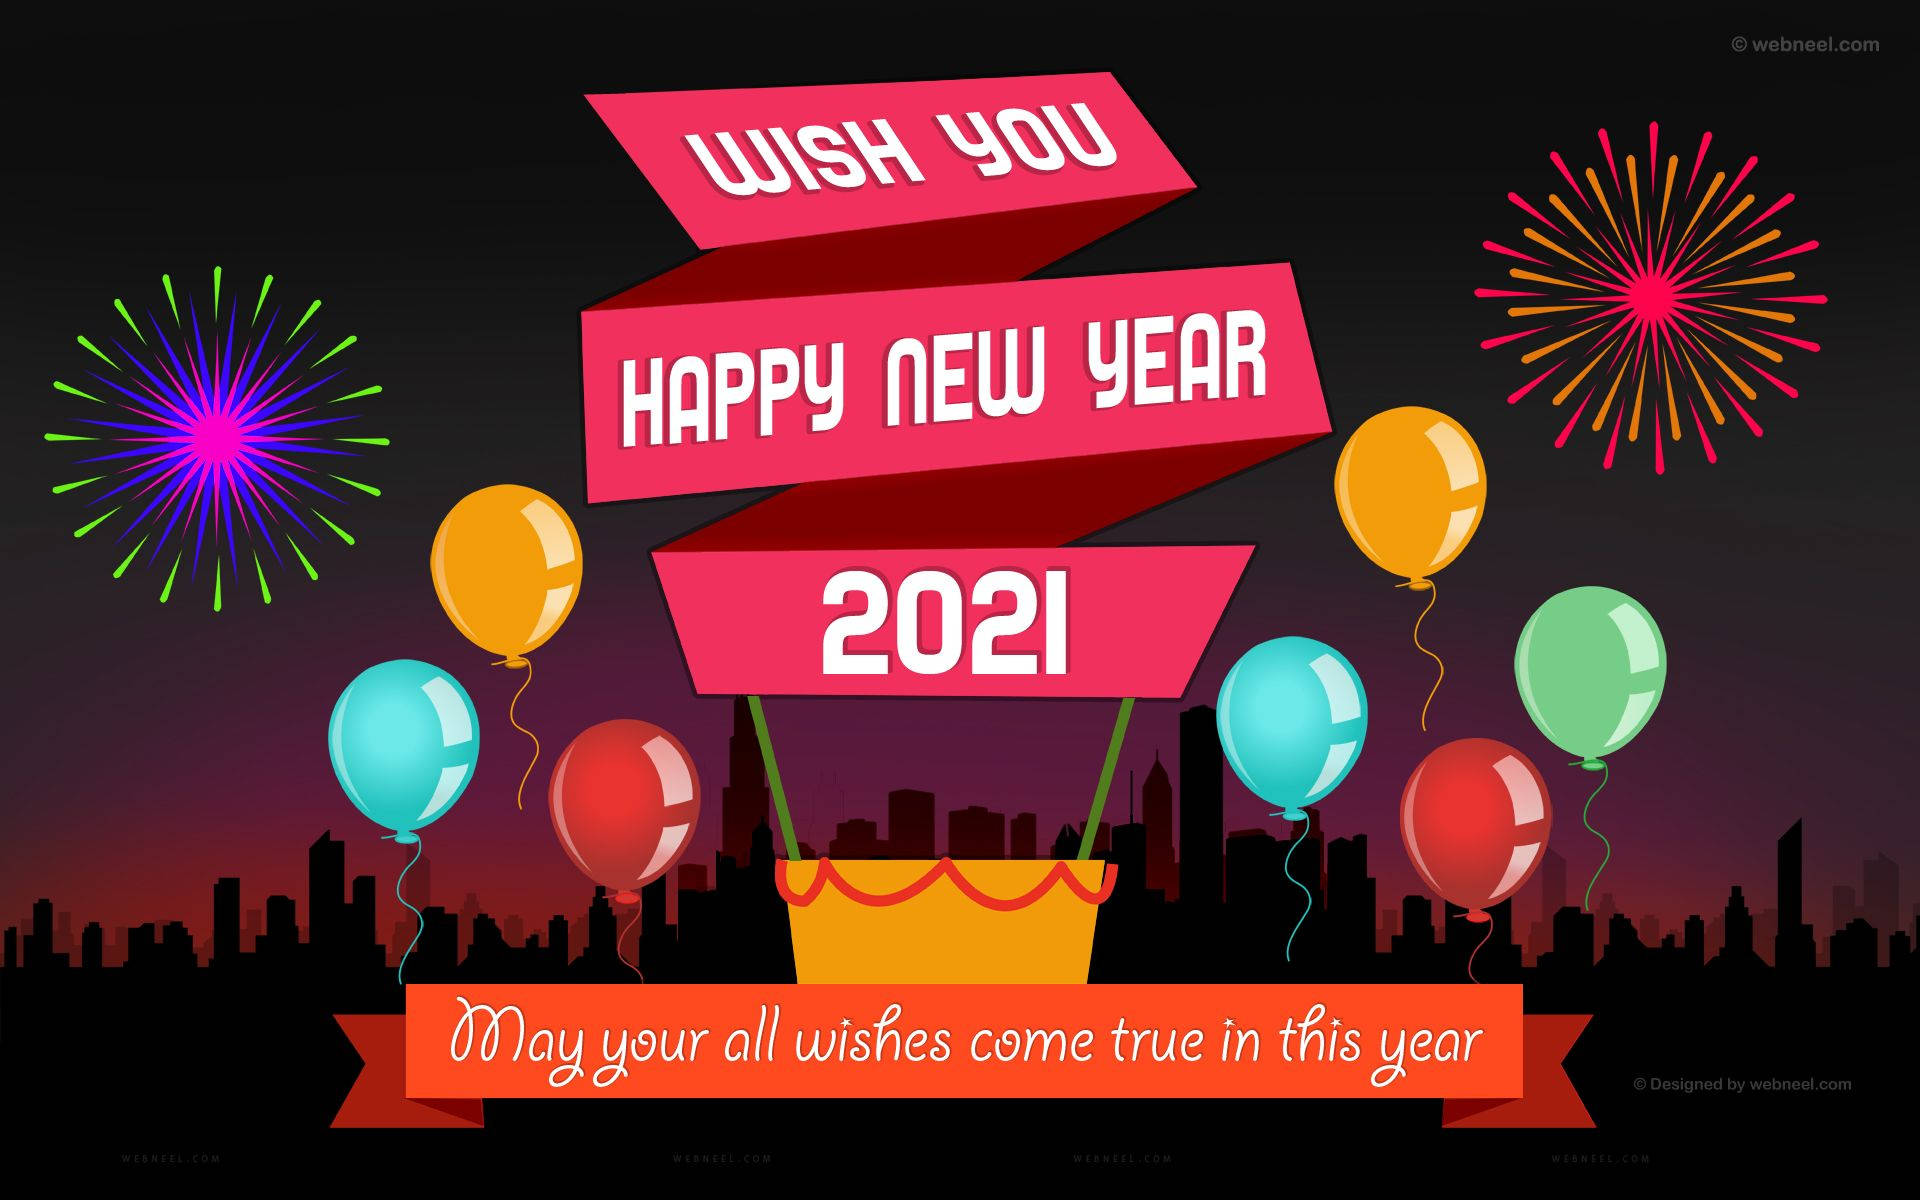 "Soaring Into 2021 With Joy - Happy New Year 2021 Hot Air Balloon" Wallpaper